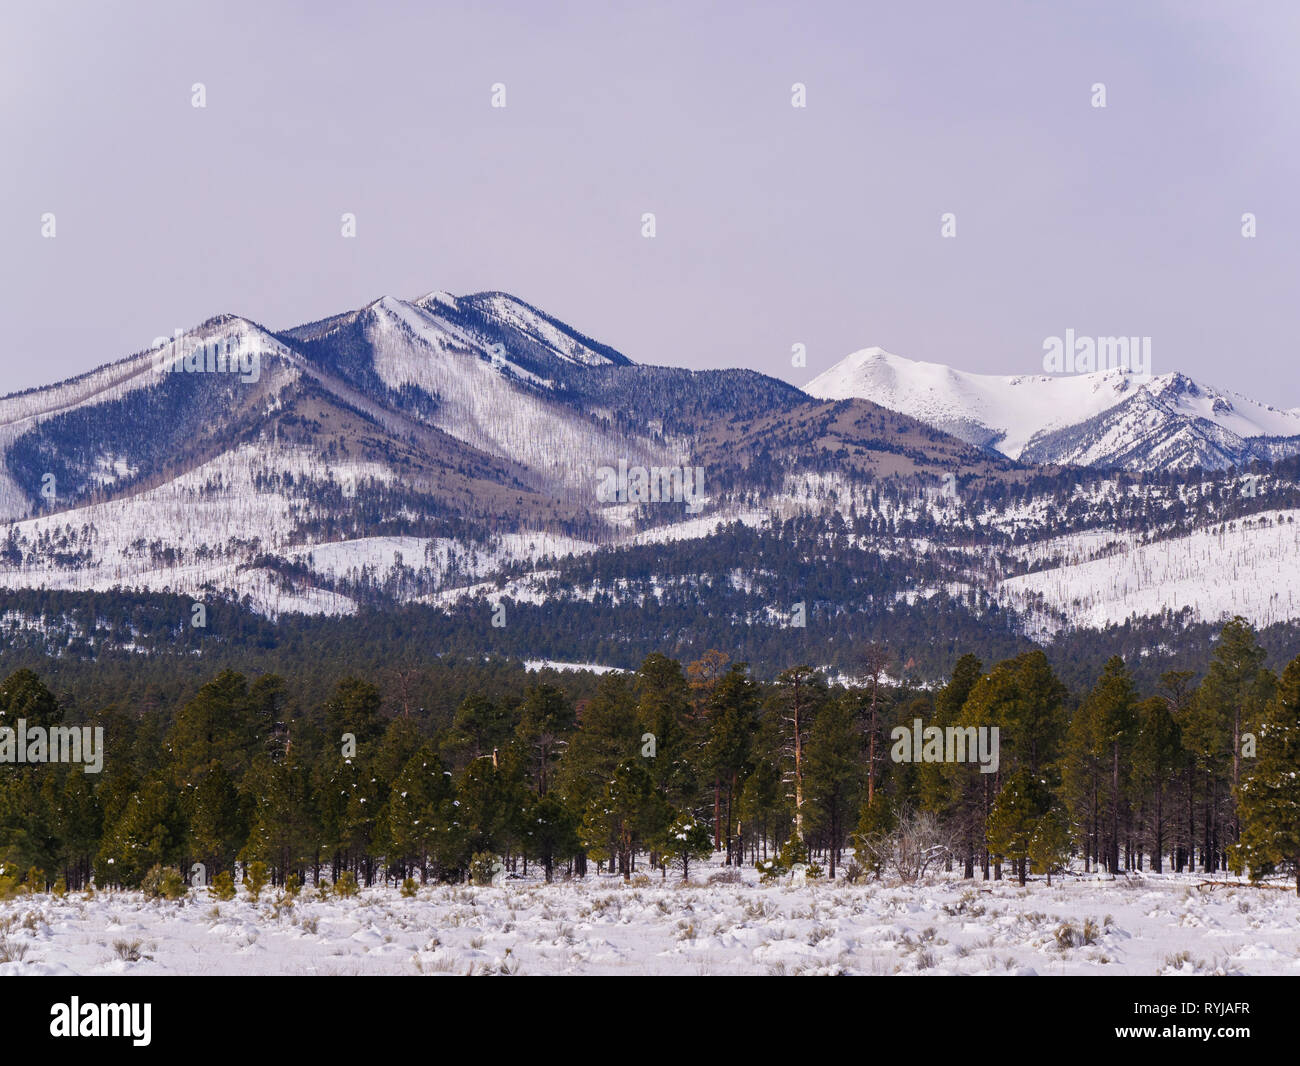 The San Francisco Peaks, which are the remnants of a collapsed stratovolcano, as viewed from Sunset Crater National Monument, Arizona. Stock Photo